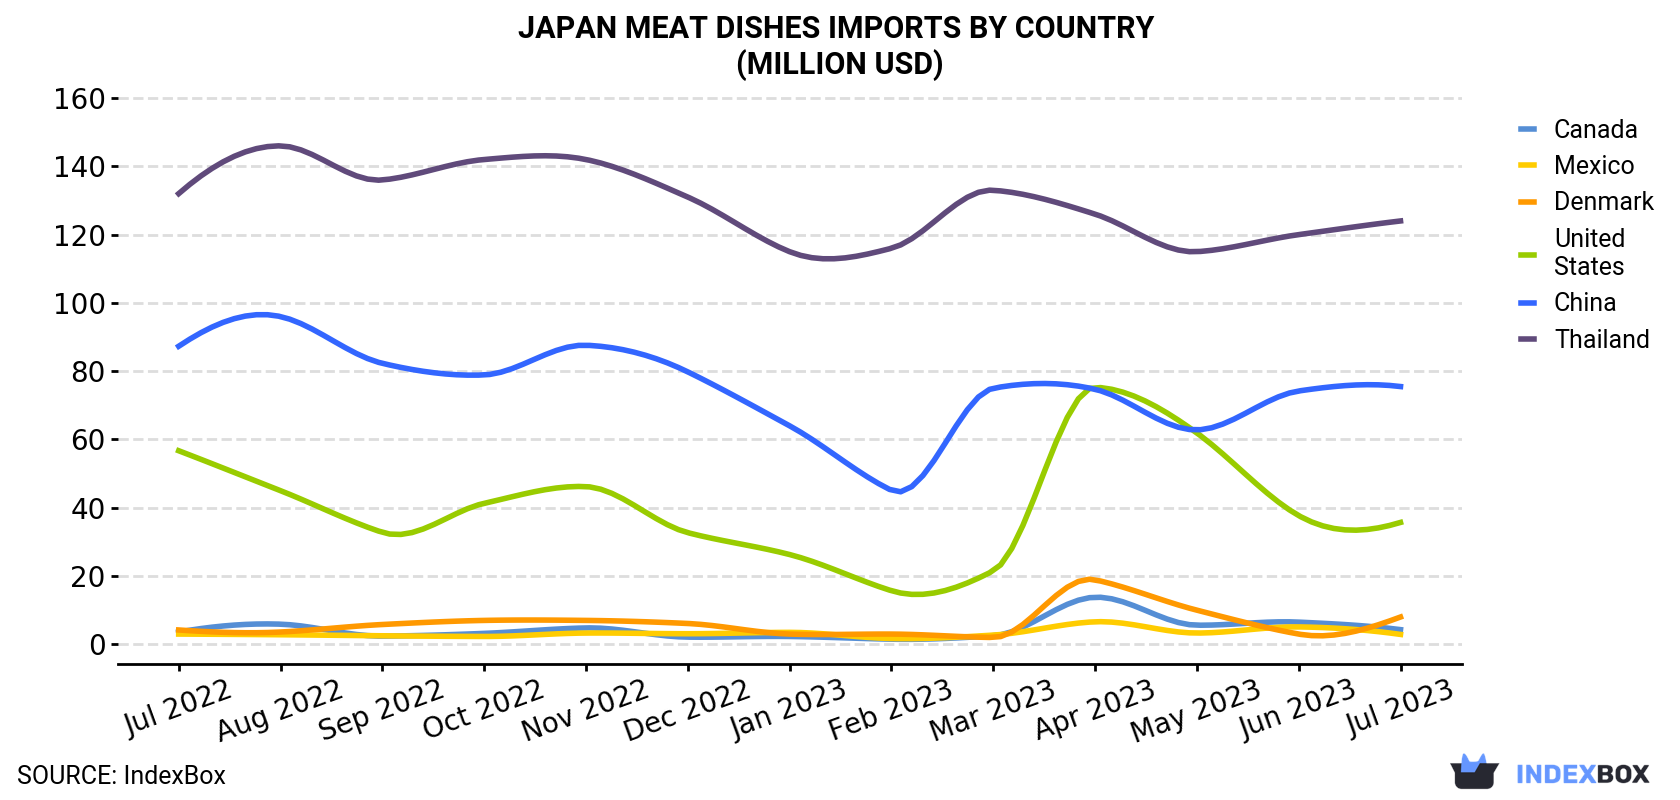 Japan Meat Dishes Imports By Country (Million USD)